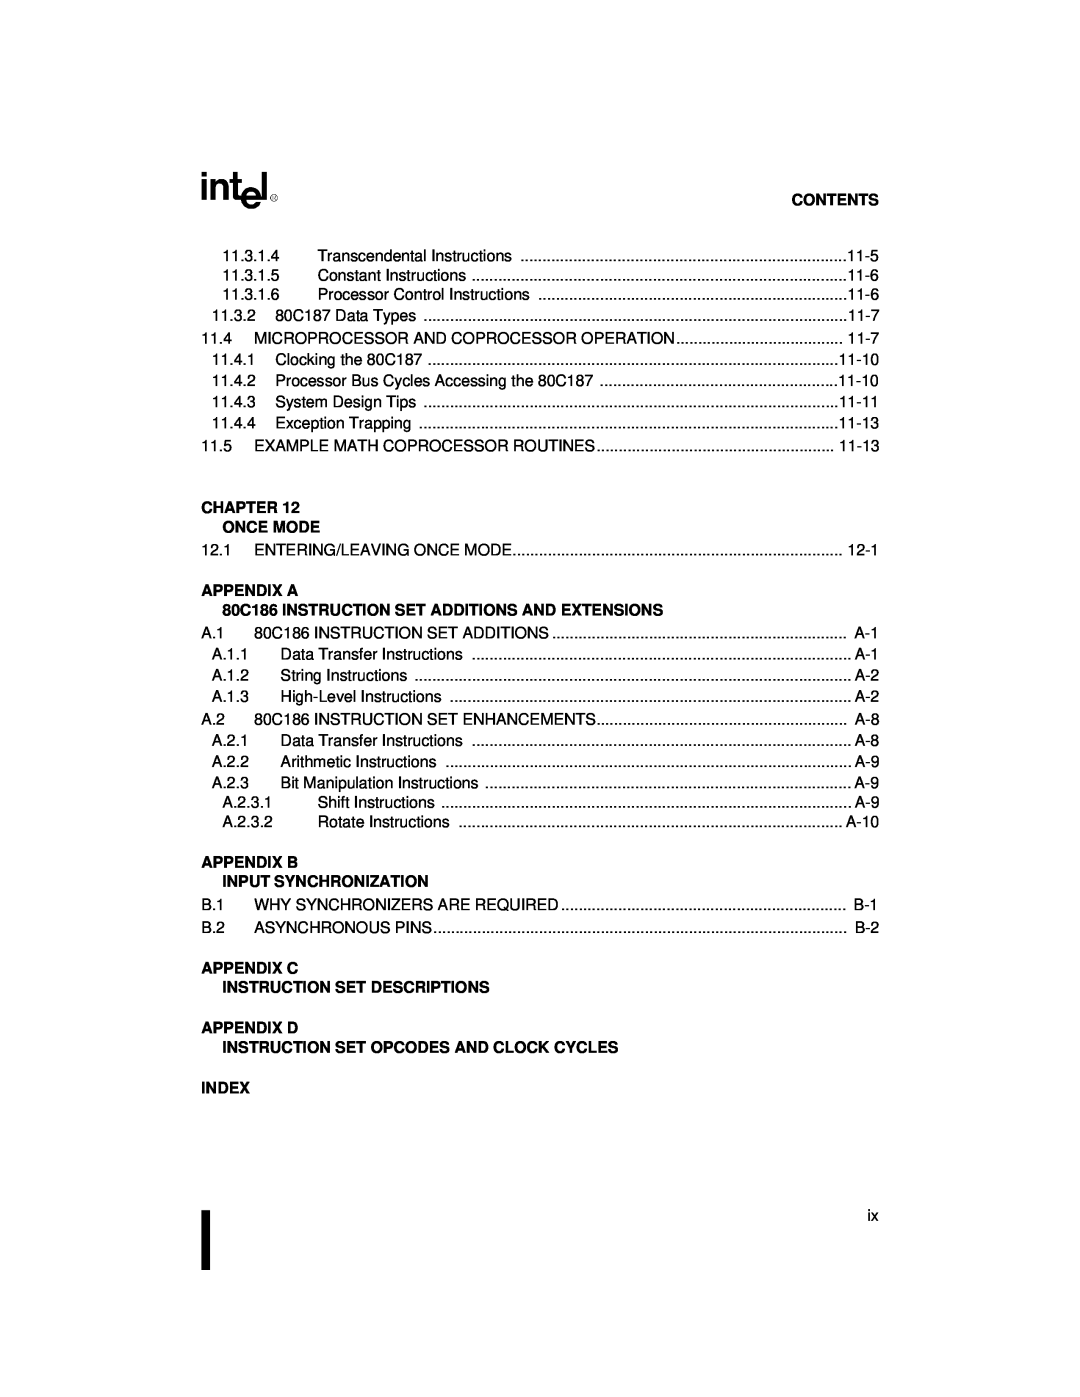 Intel 80C188XL Contents, Chapter, Once Mode, Appendix A, 80C186 INSTRUCTION SET ADDITIONS AND EXTENSIONS, Appendix B 